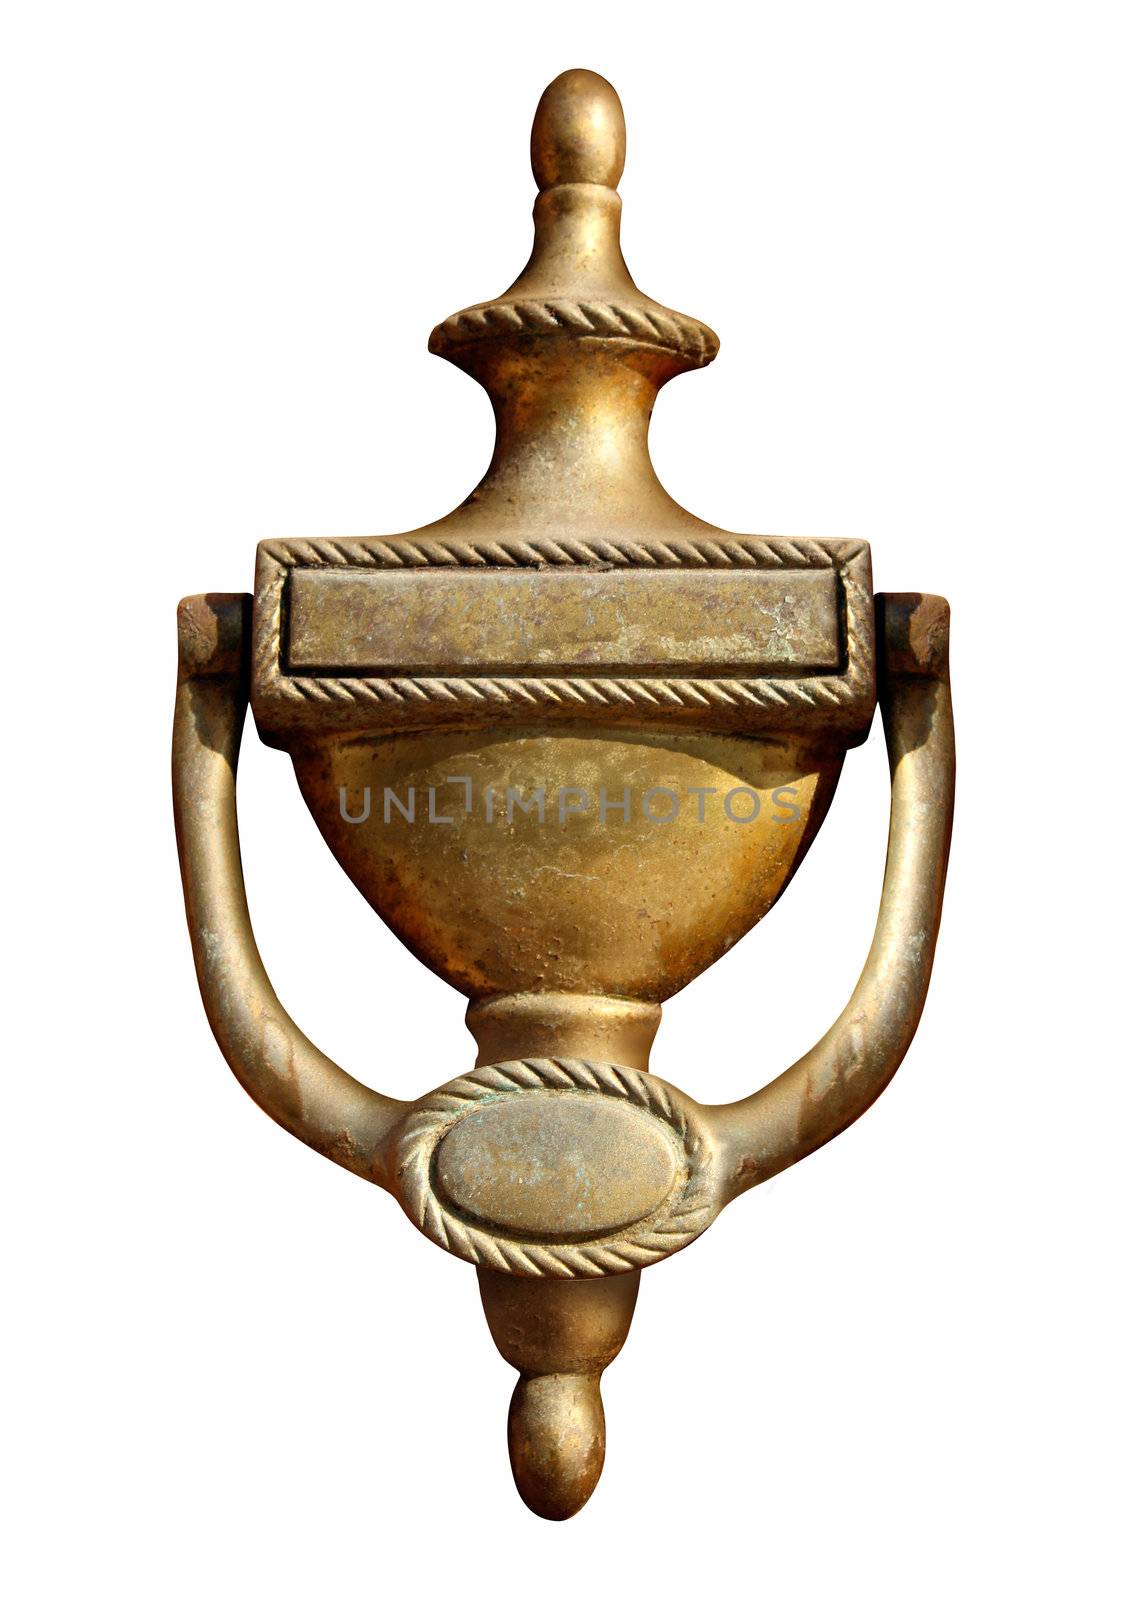 Elegant door knocker made of old fashioned vintage brass metal isolated on a white background as a symbol of residential and real estate home entrance.